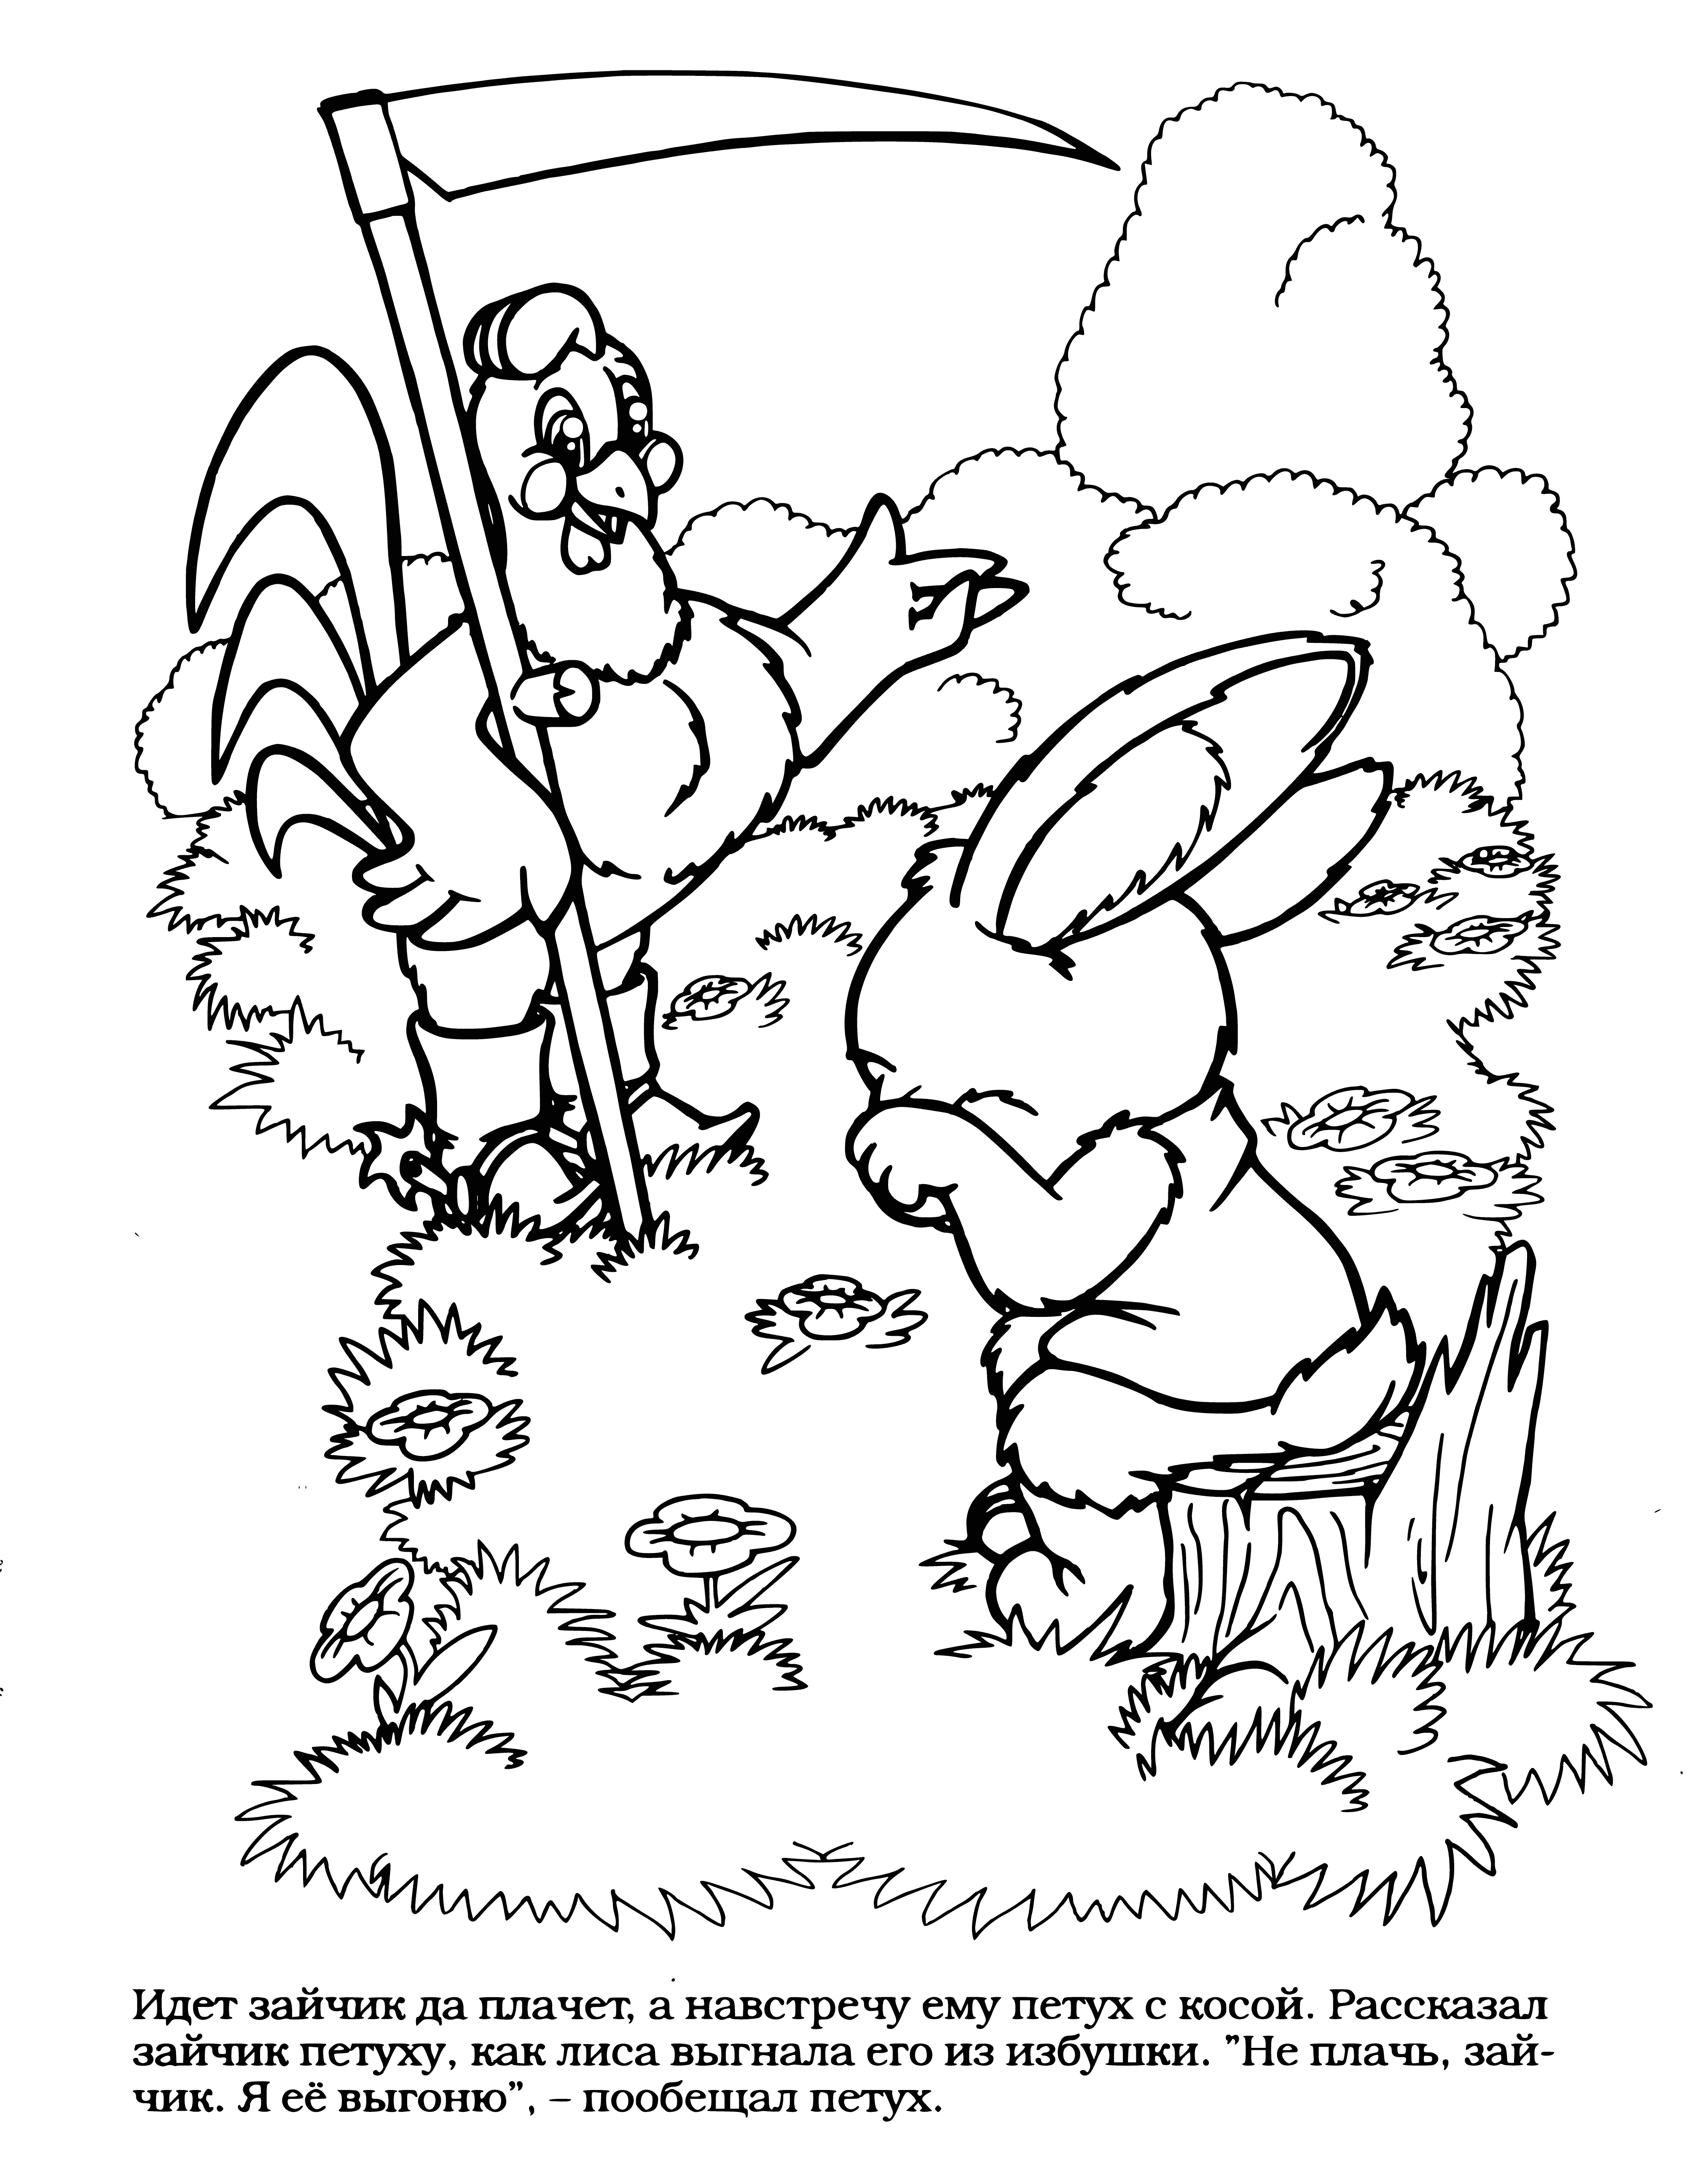 coloring page: Bunny and cockerel stare at each other, both standing on two legs; red-combed cockerel looking inquisitively at Bunny.